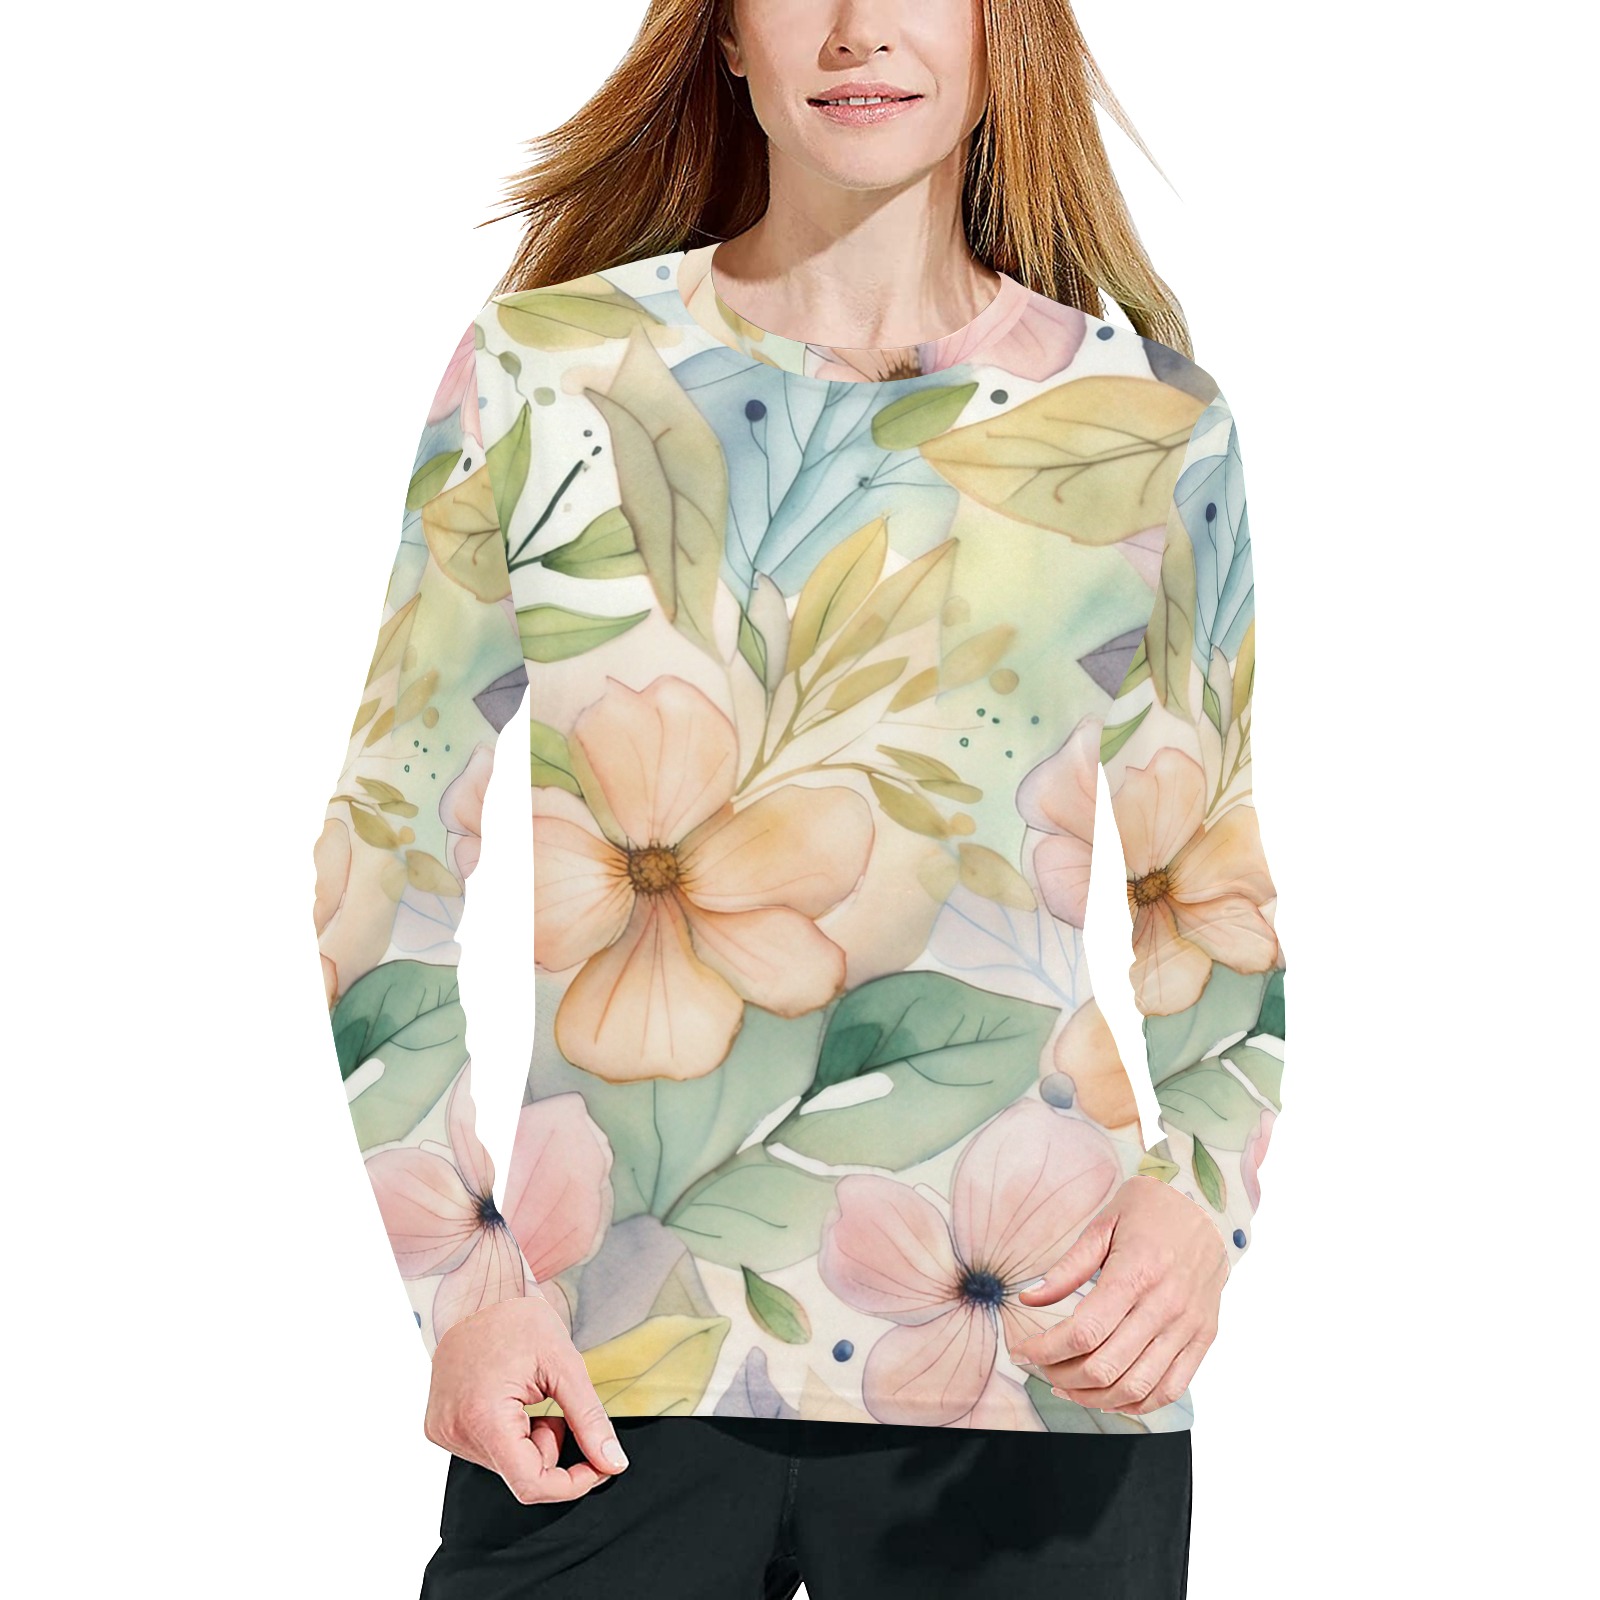 Watercolor Floral 1 Women's All Over Print Pajama Top